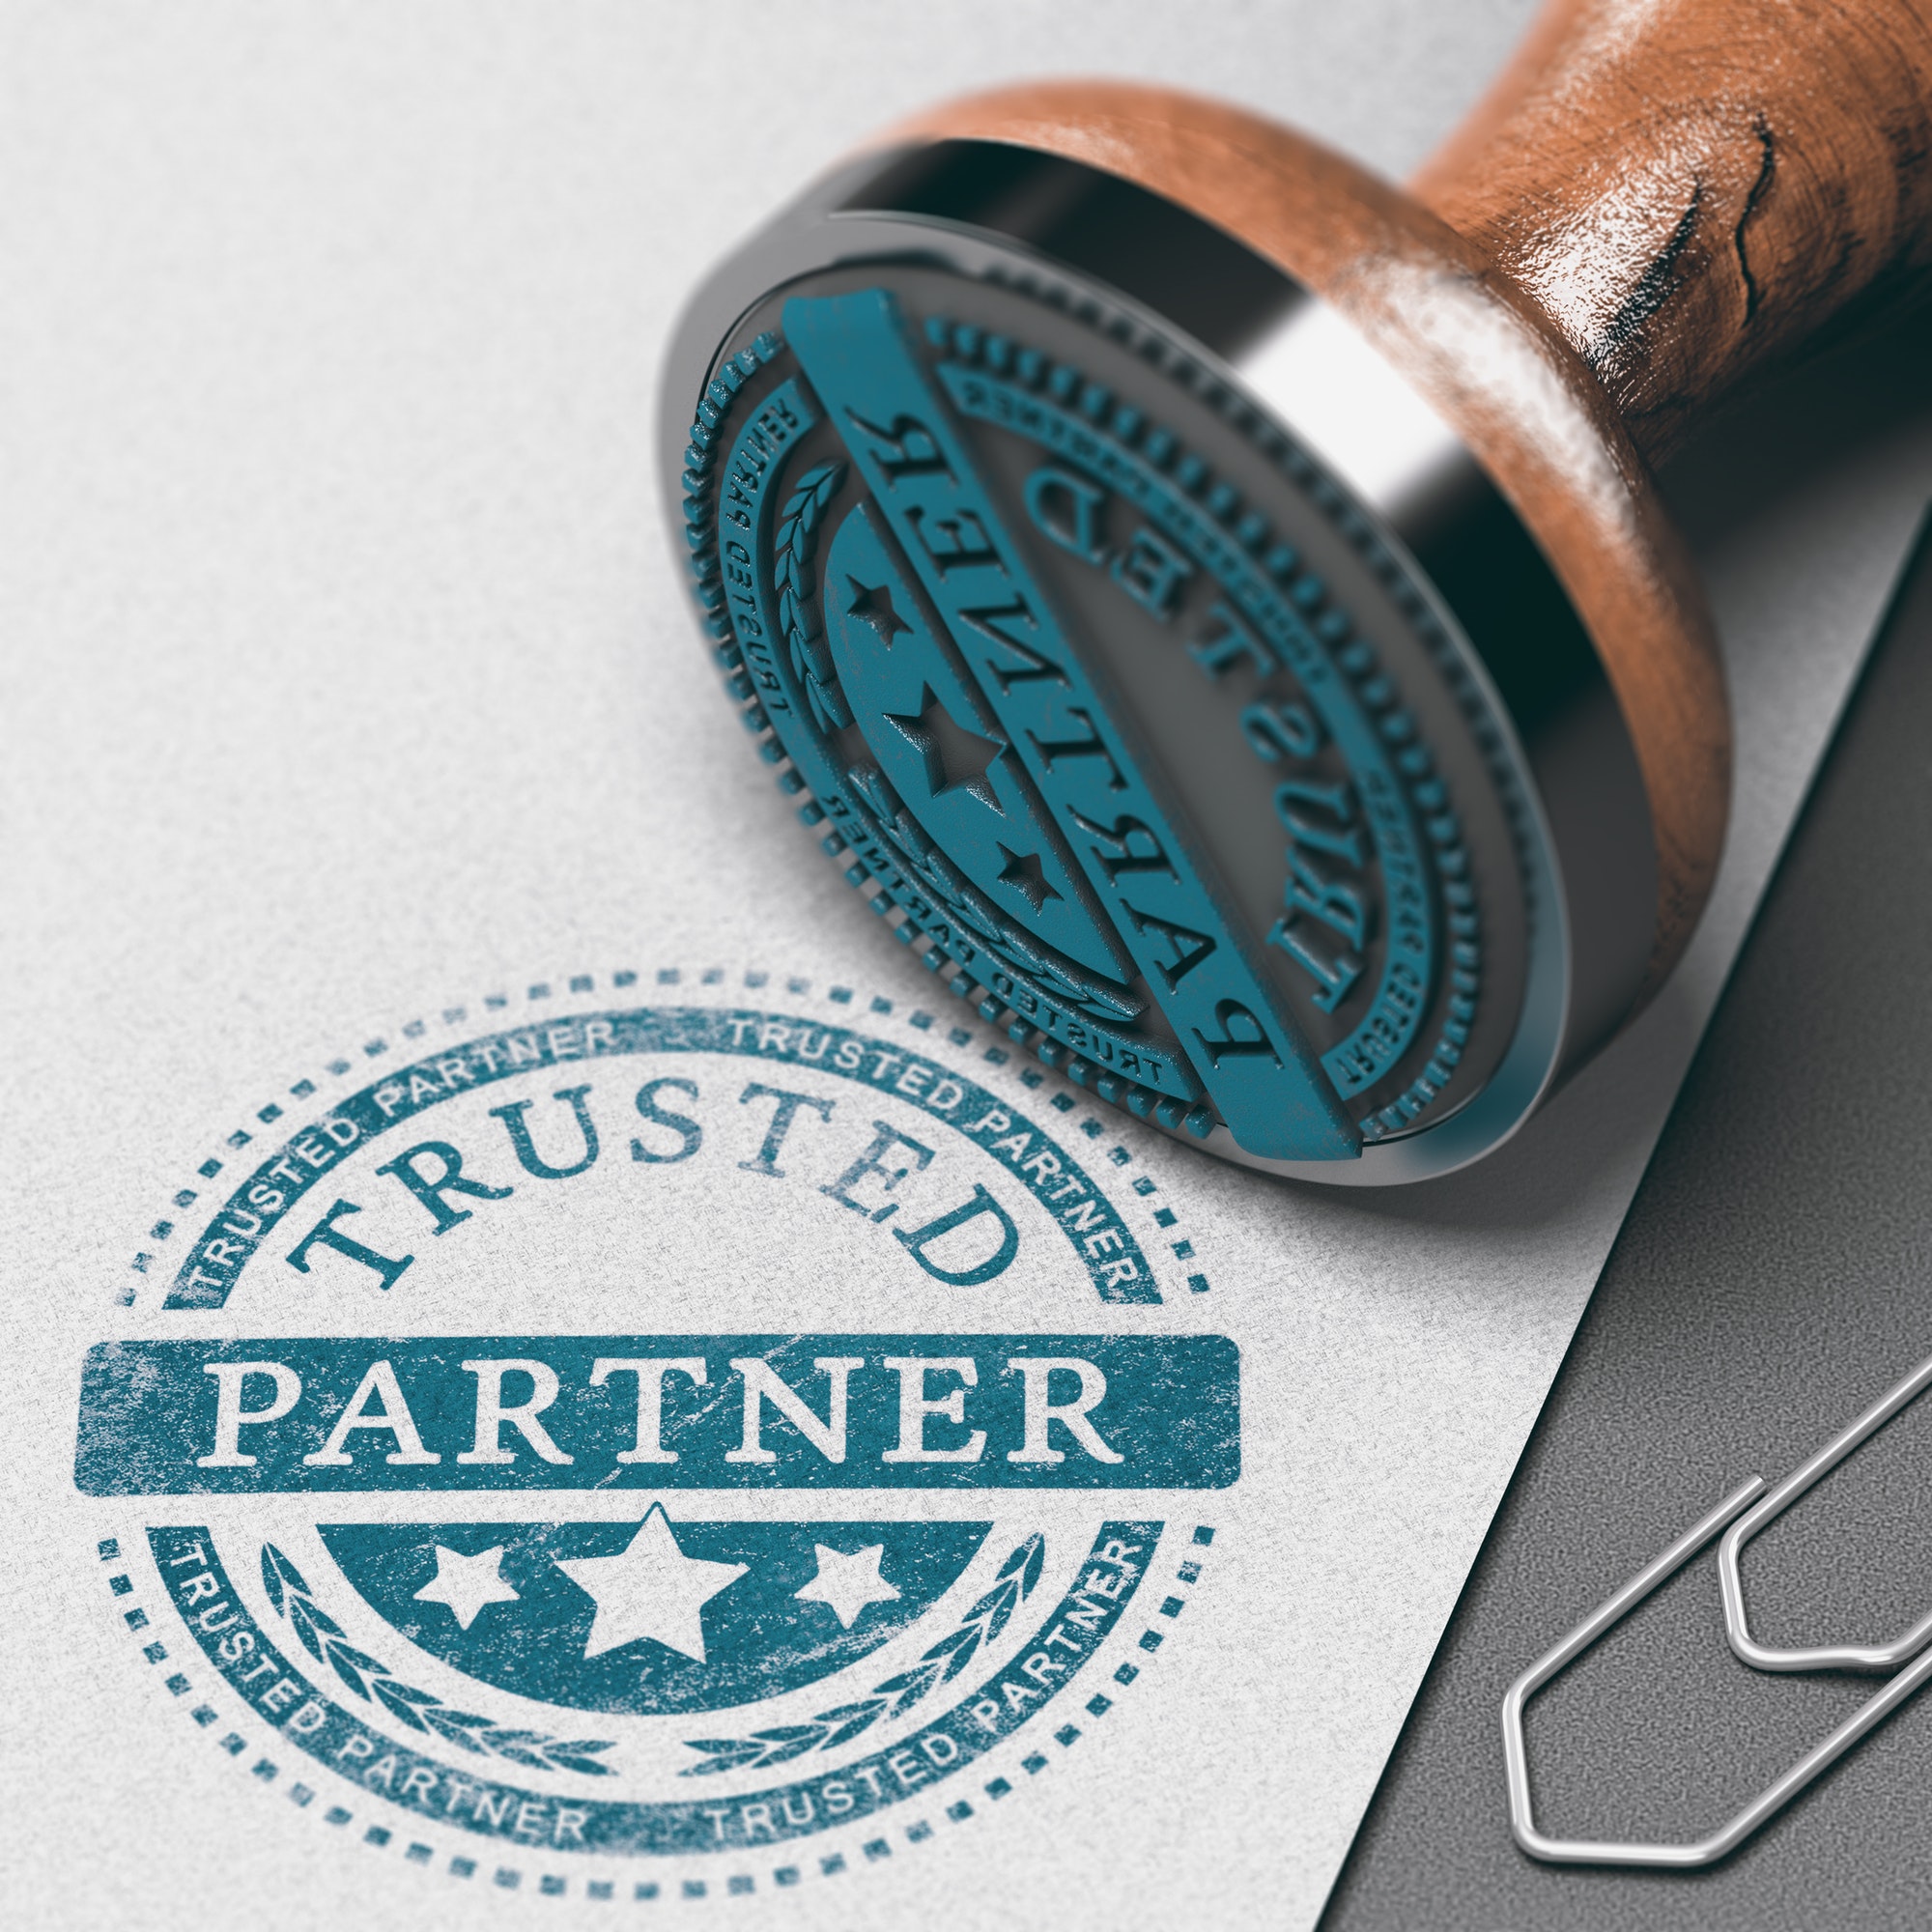 Trust in business relationships help to gain consumer trust